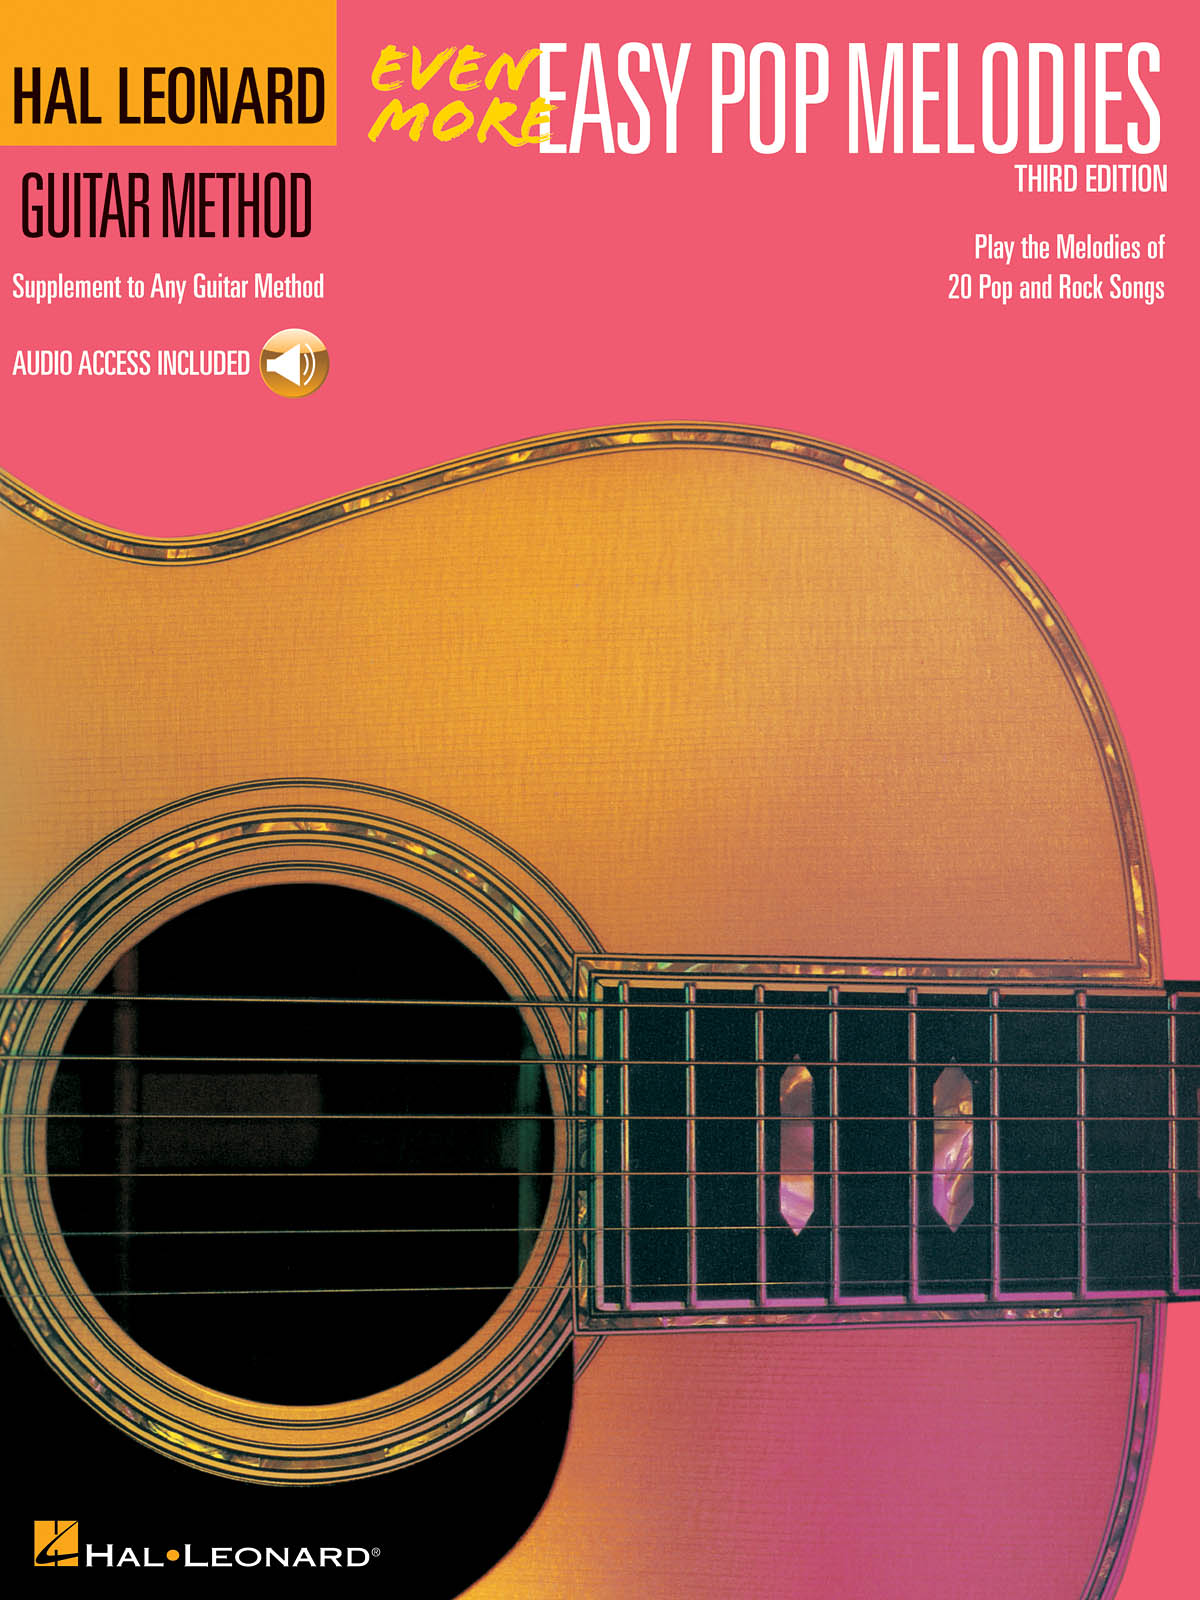 Even More Easy Pop Melodies - Third Edition: Guitar Solo: Mixed Songbook